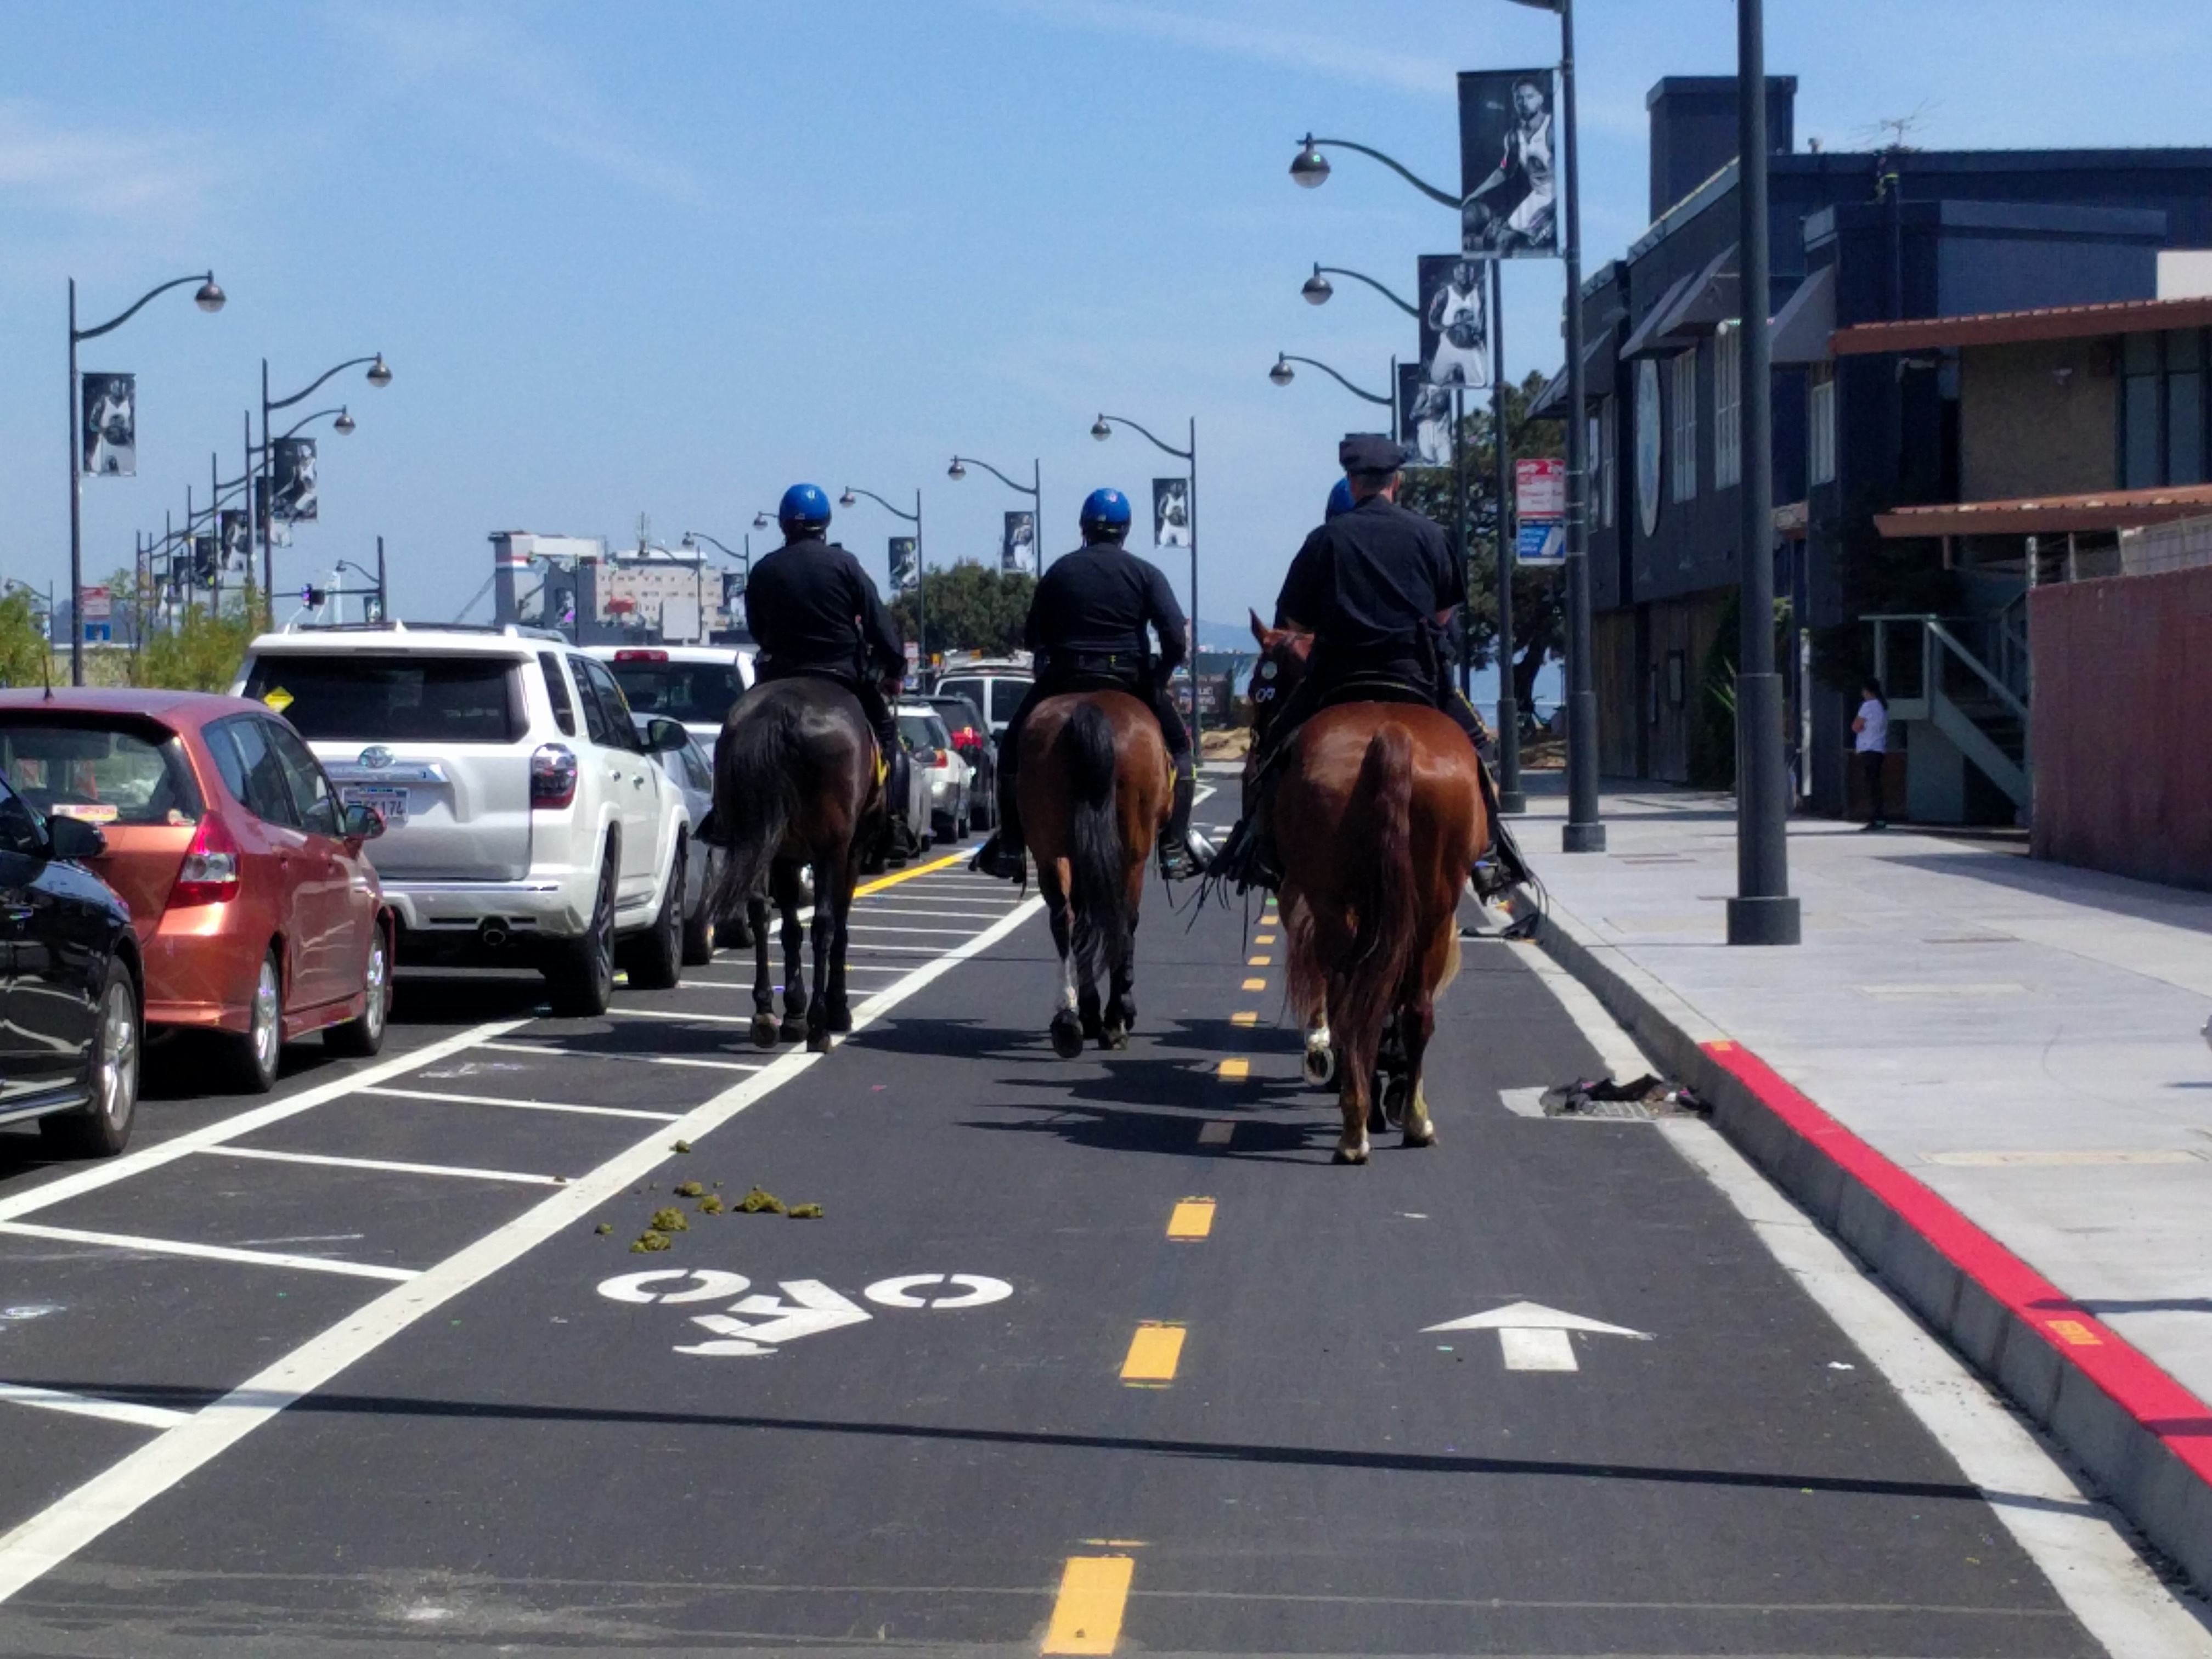 These horses asses were using the bike lane--literally.